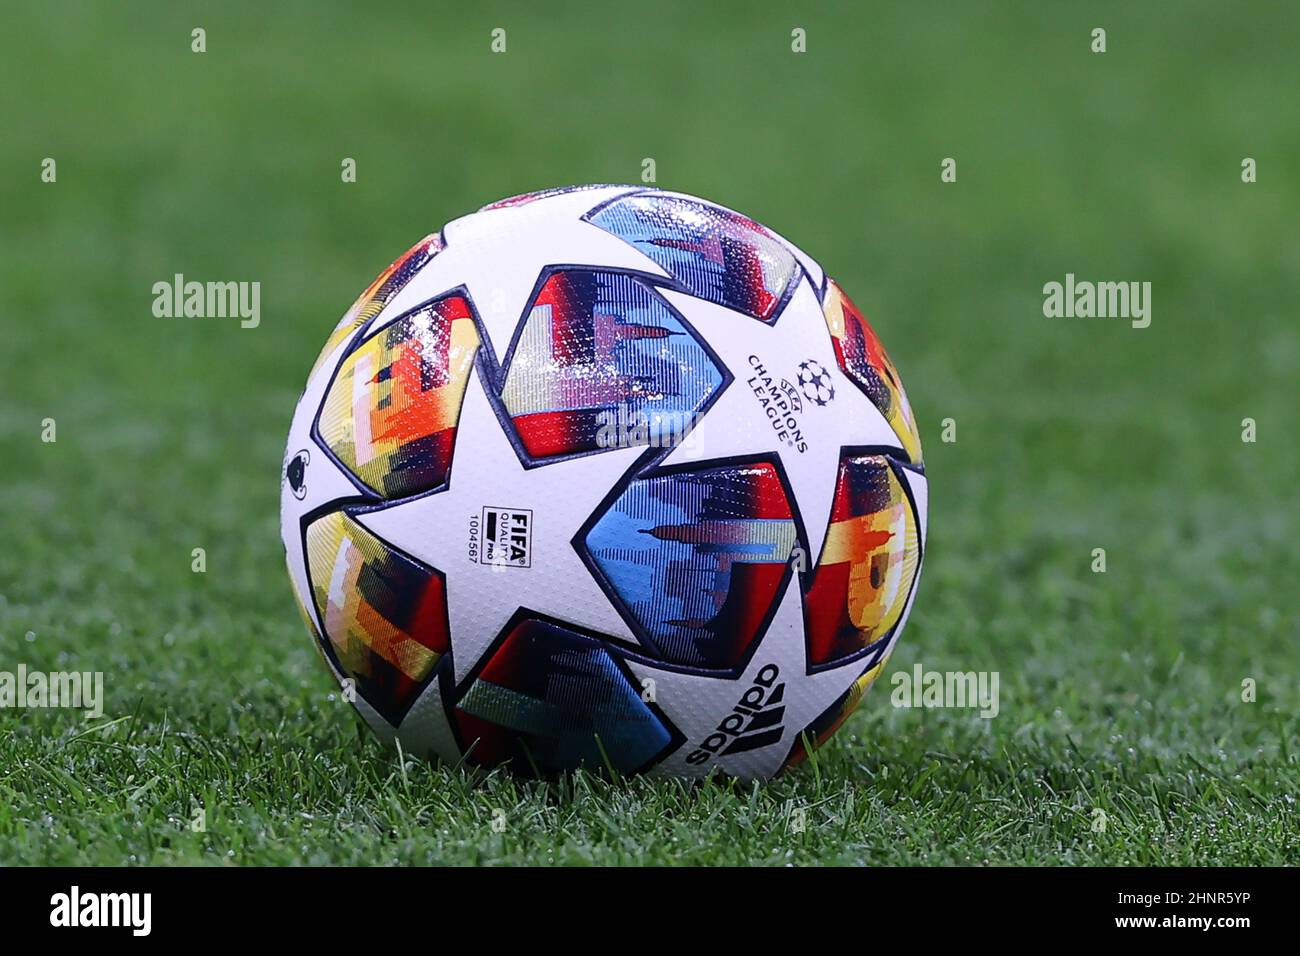 The Adidas official UEFA Champions League match ball Saint Petersburg 22  Final during the UEFA Champions League 2021/22 Round of 16 - First leg  football match between FC Internazionale and Liverpool FC